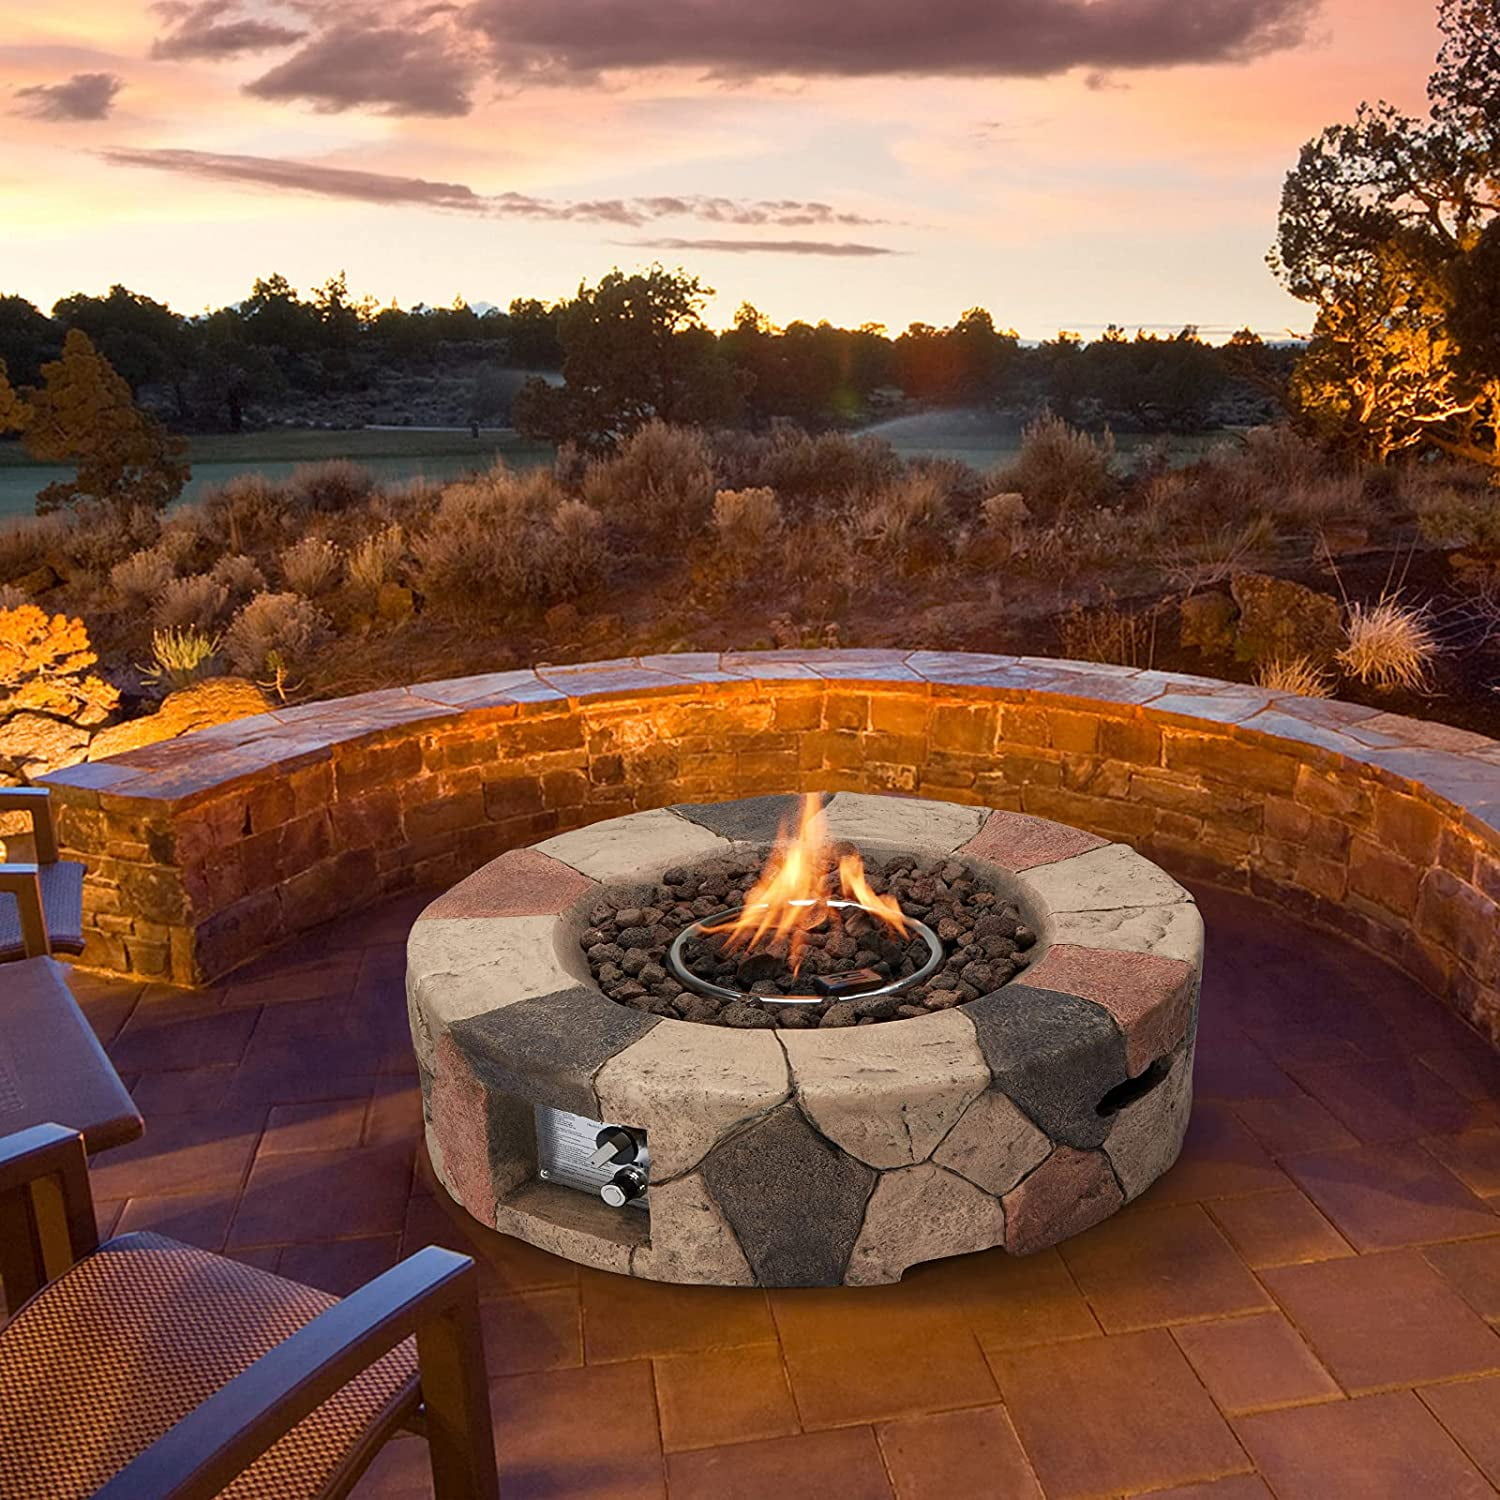 Avawing 28inch Gas Fire Pit 40 000 Btu, How To Make A Backyard Gas Fire Pit